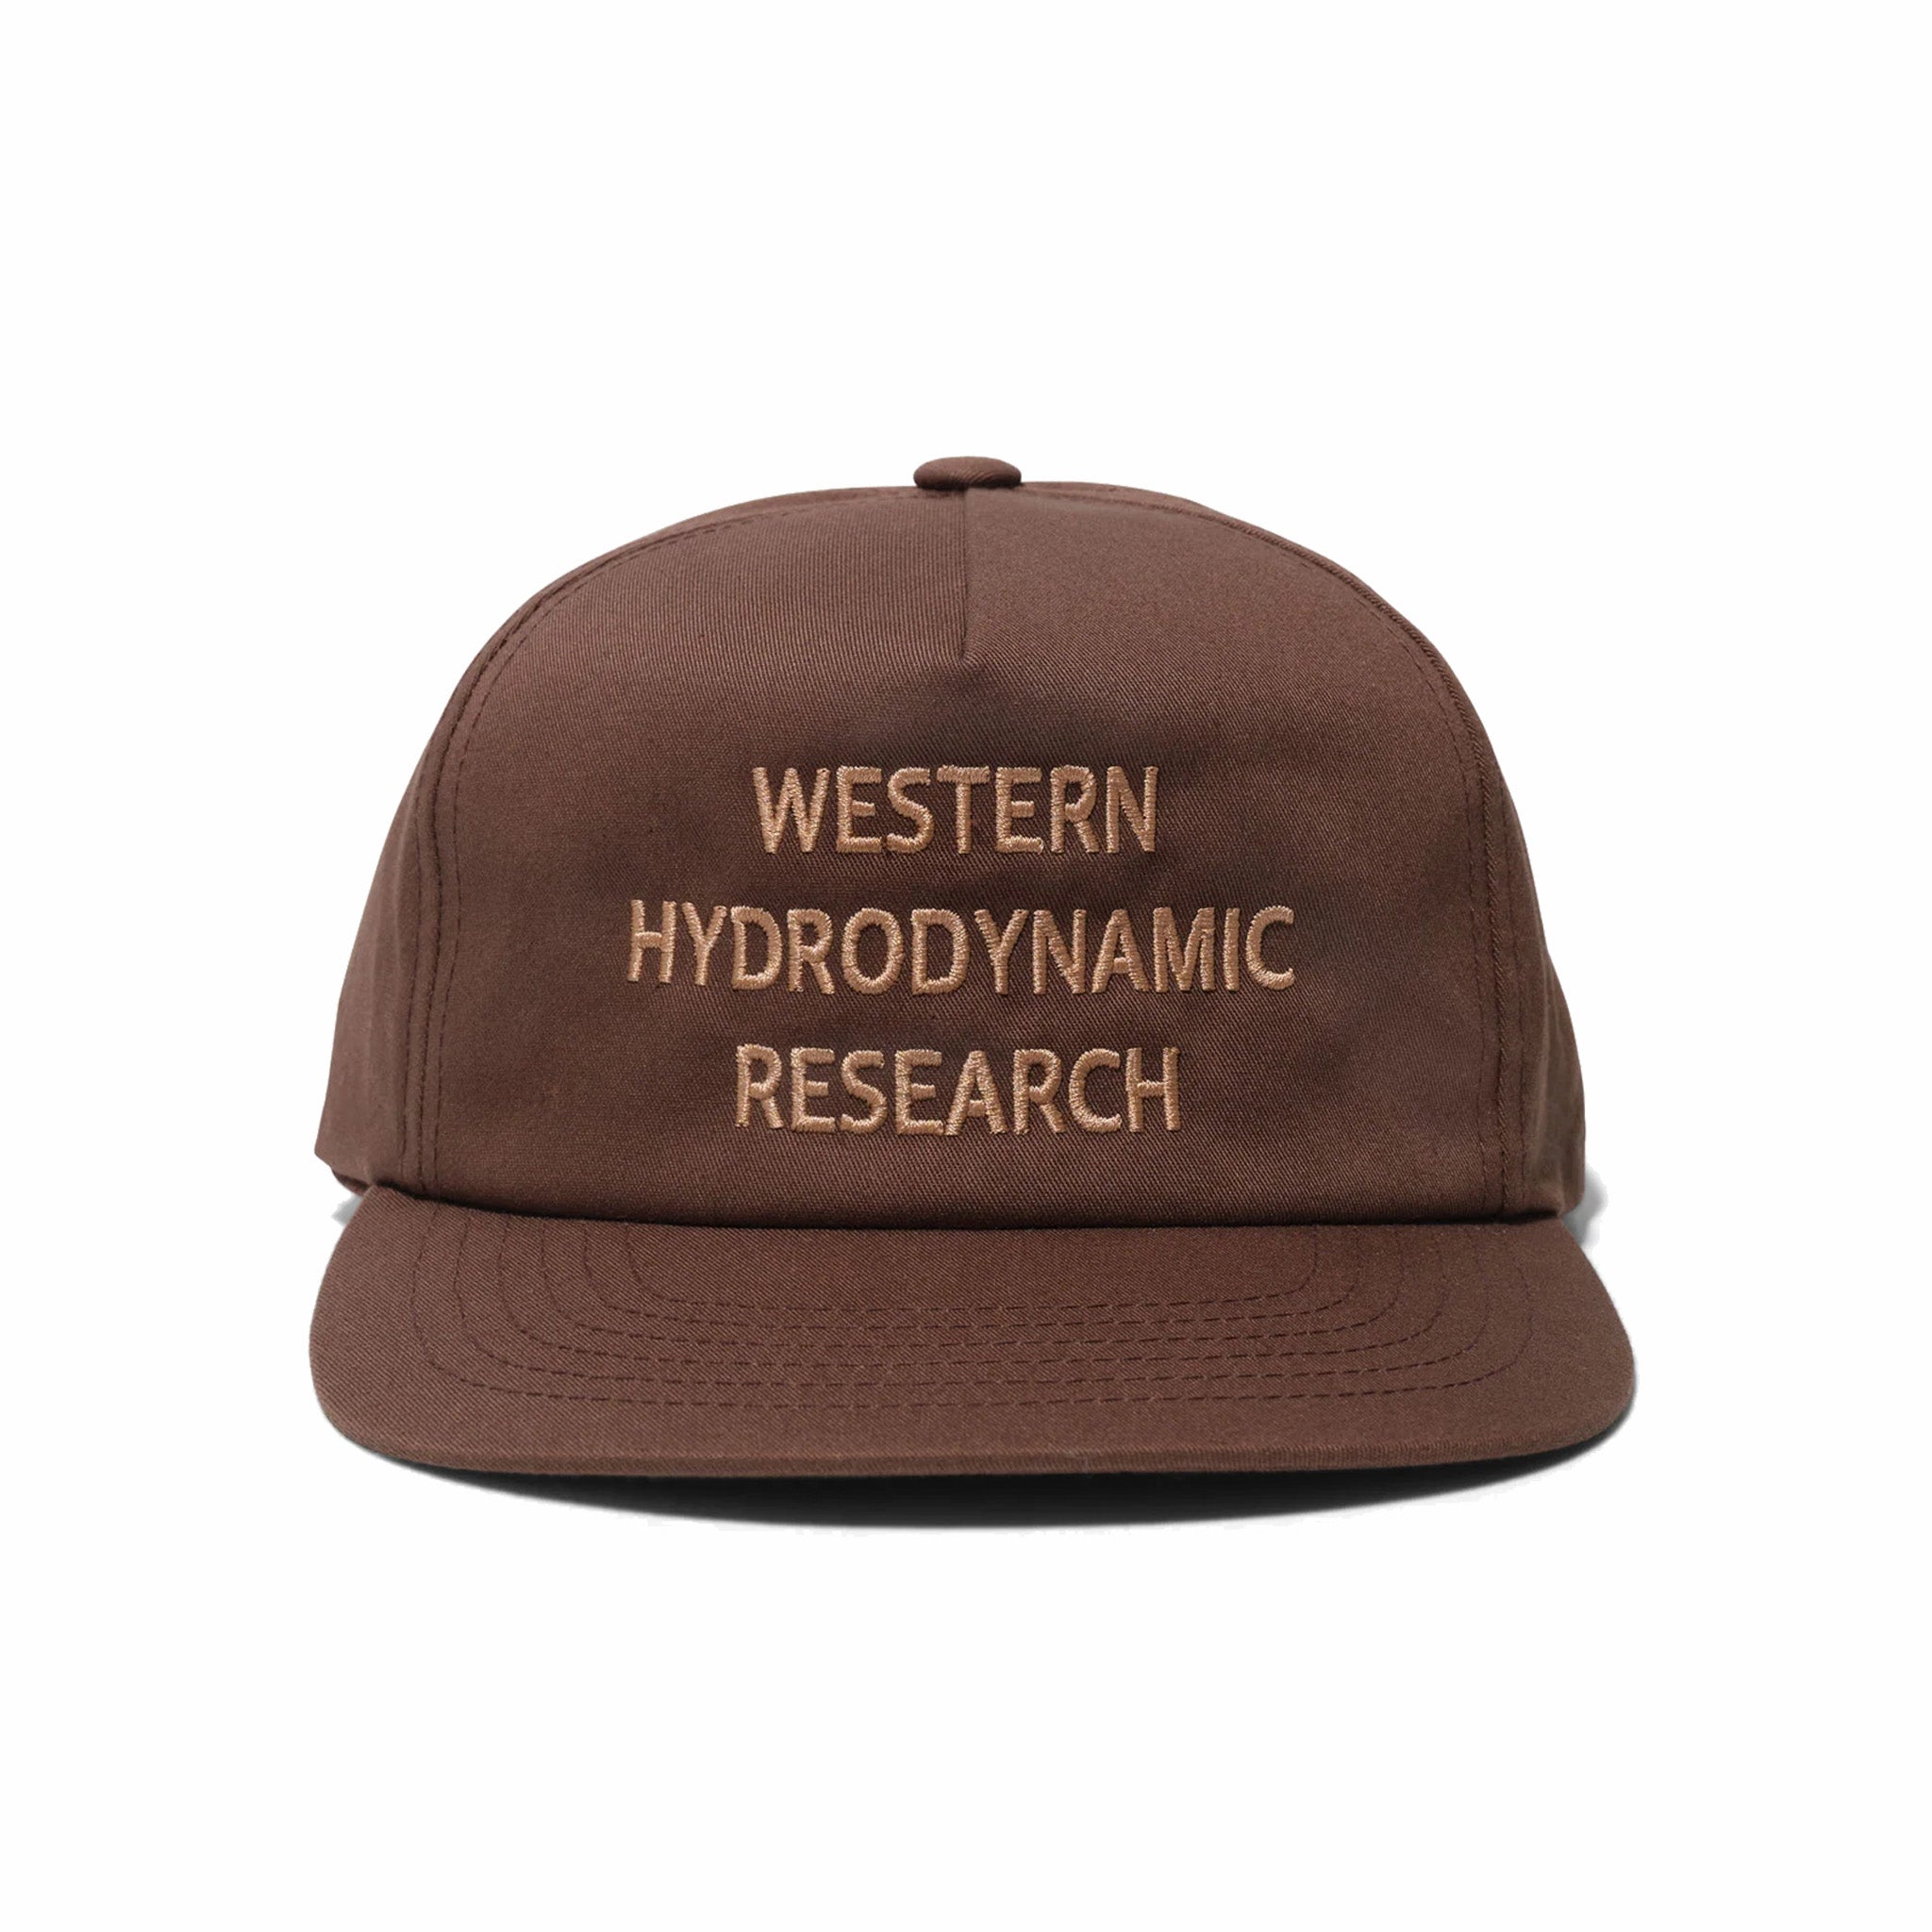 Western Hydrodynamic Research Promotional Hat (Brown/Gold) - August Shop